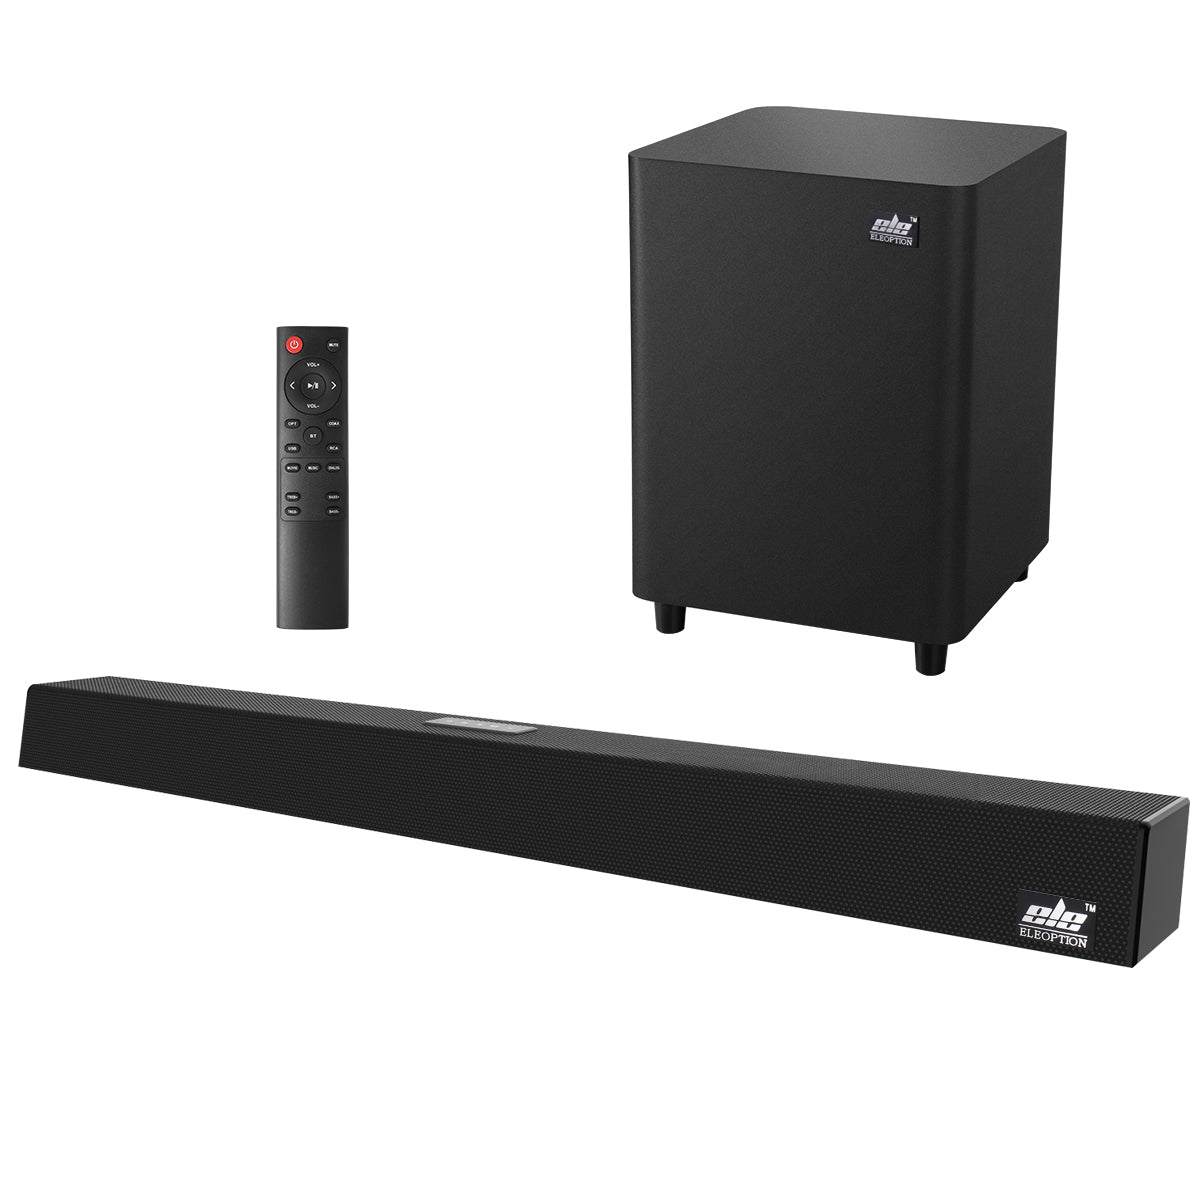 120W Home Theater Sound System Soundbar 2.1 TV Bluetooth Speaker Support Optical AUX Coaxial Sound Bar Subwoofer Speakers For TV